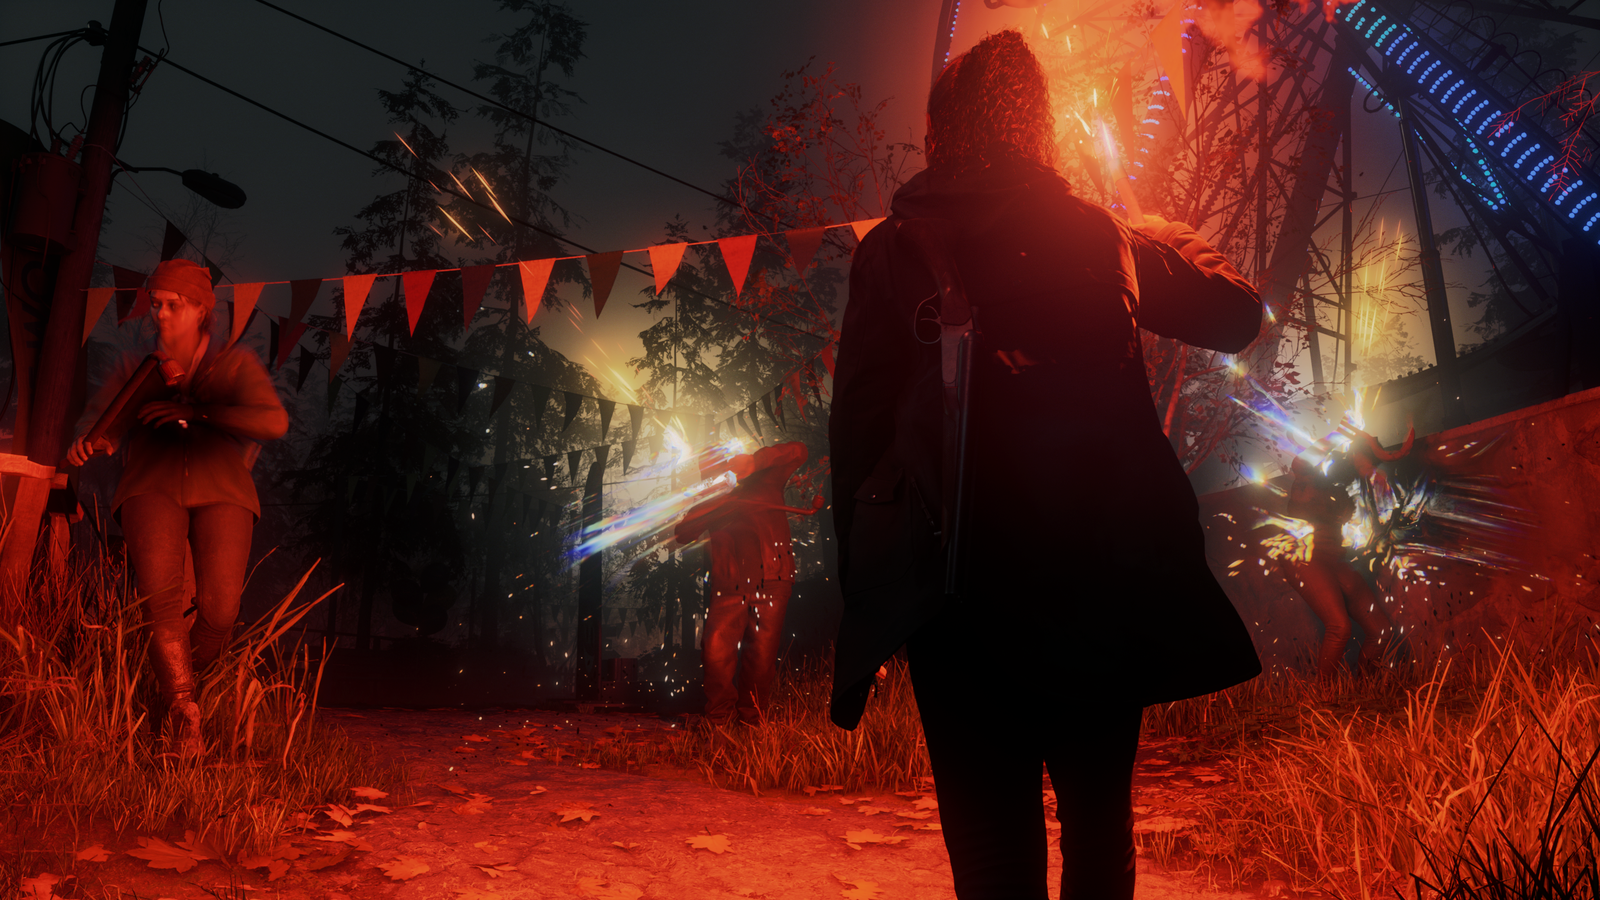 Alan Wake 2 Will Get Free & Paid DLC After Launch